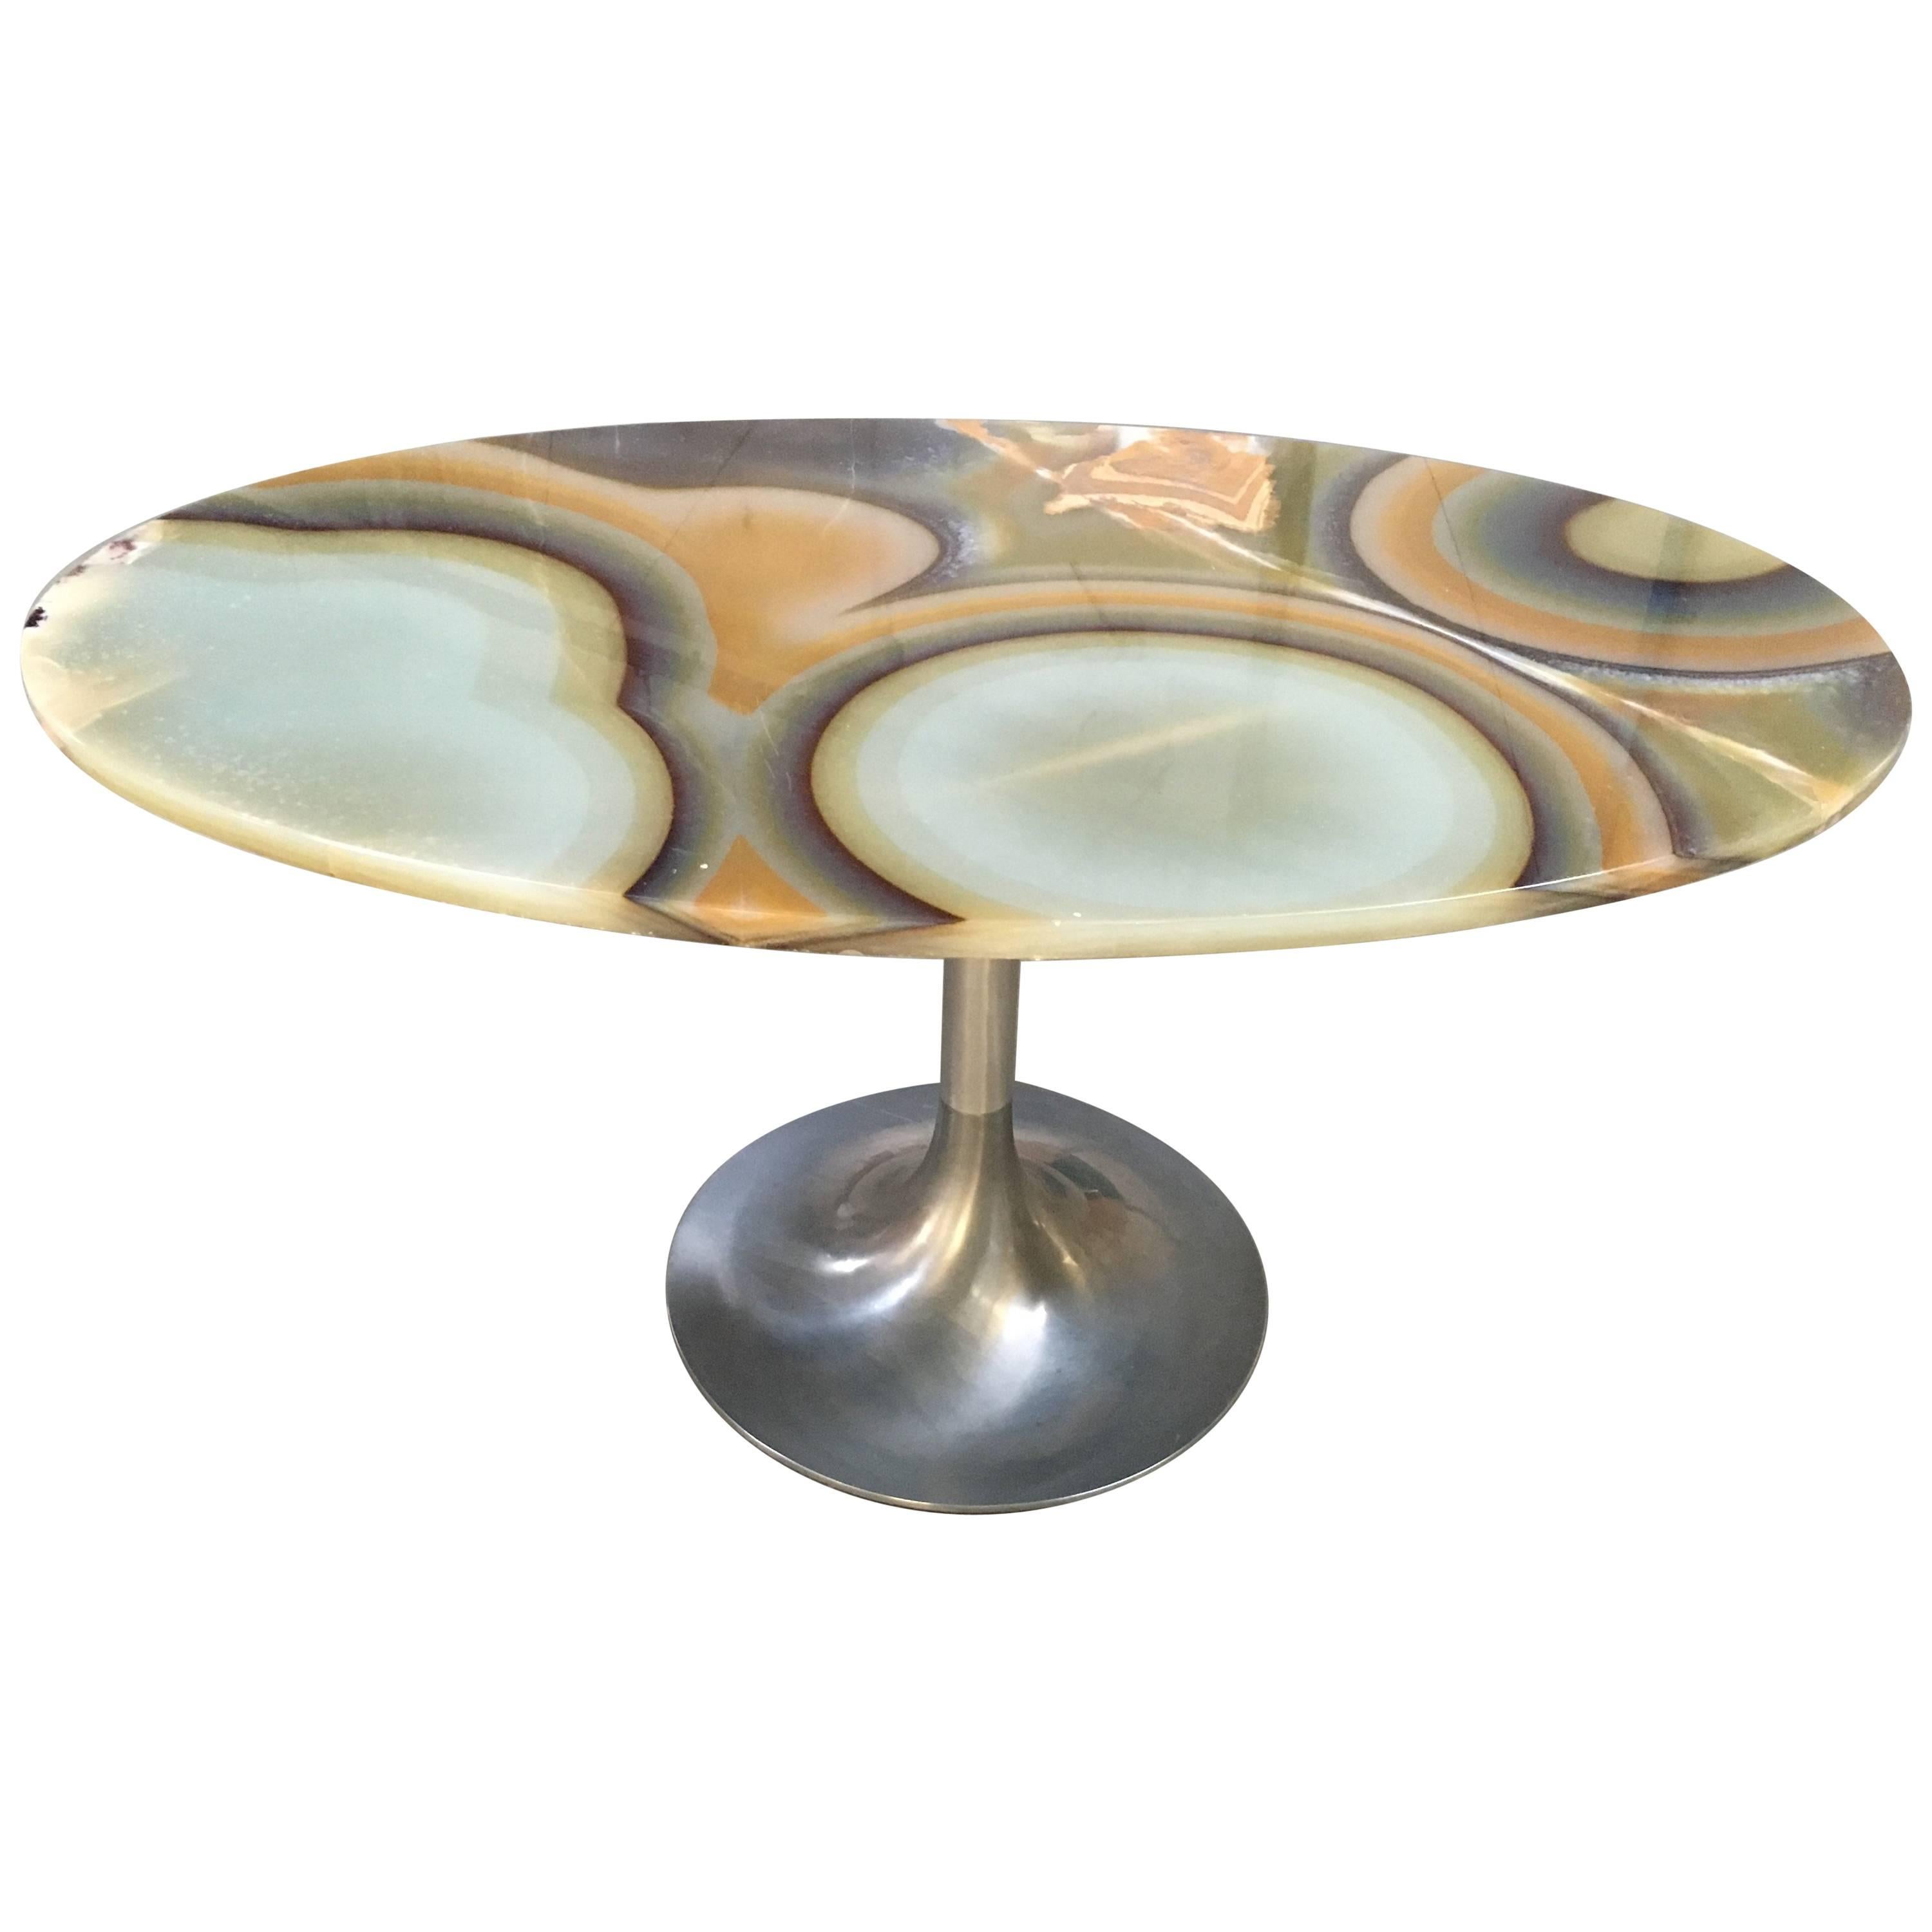 Italian Table with Aluminium base and Onyx Top from 1960s